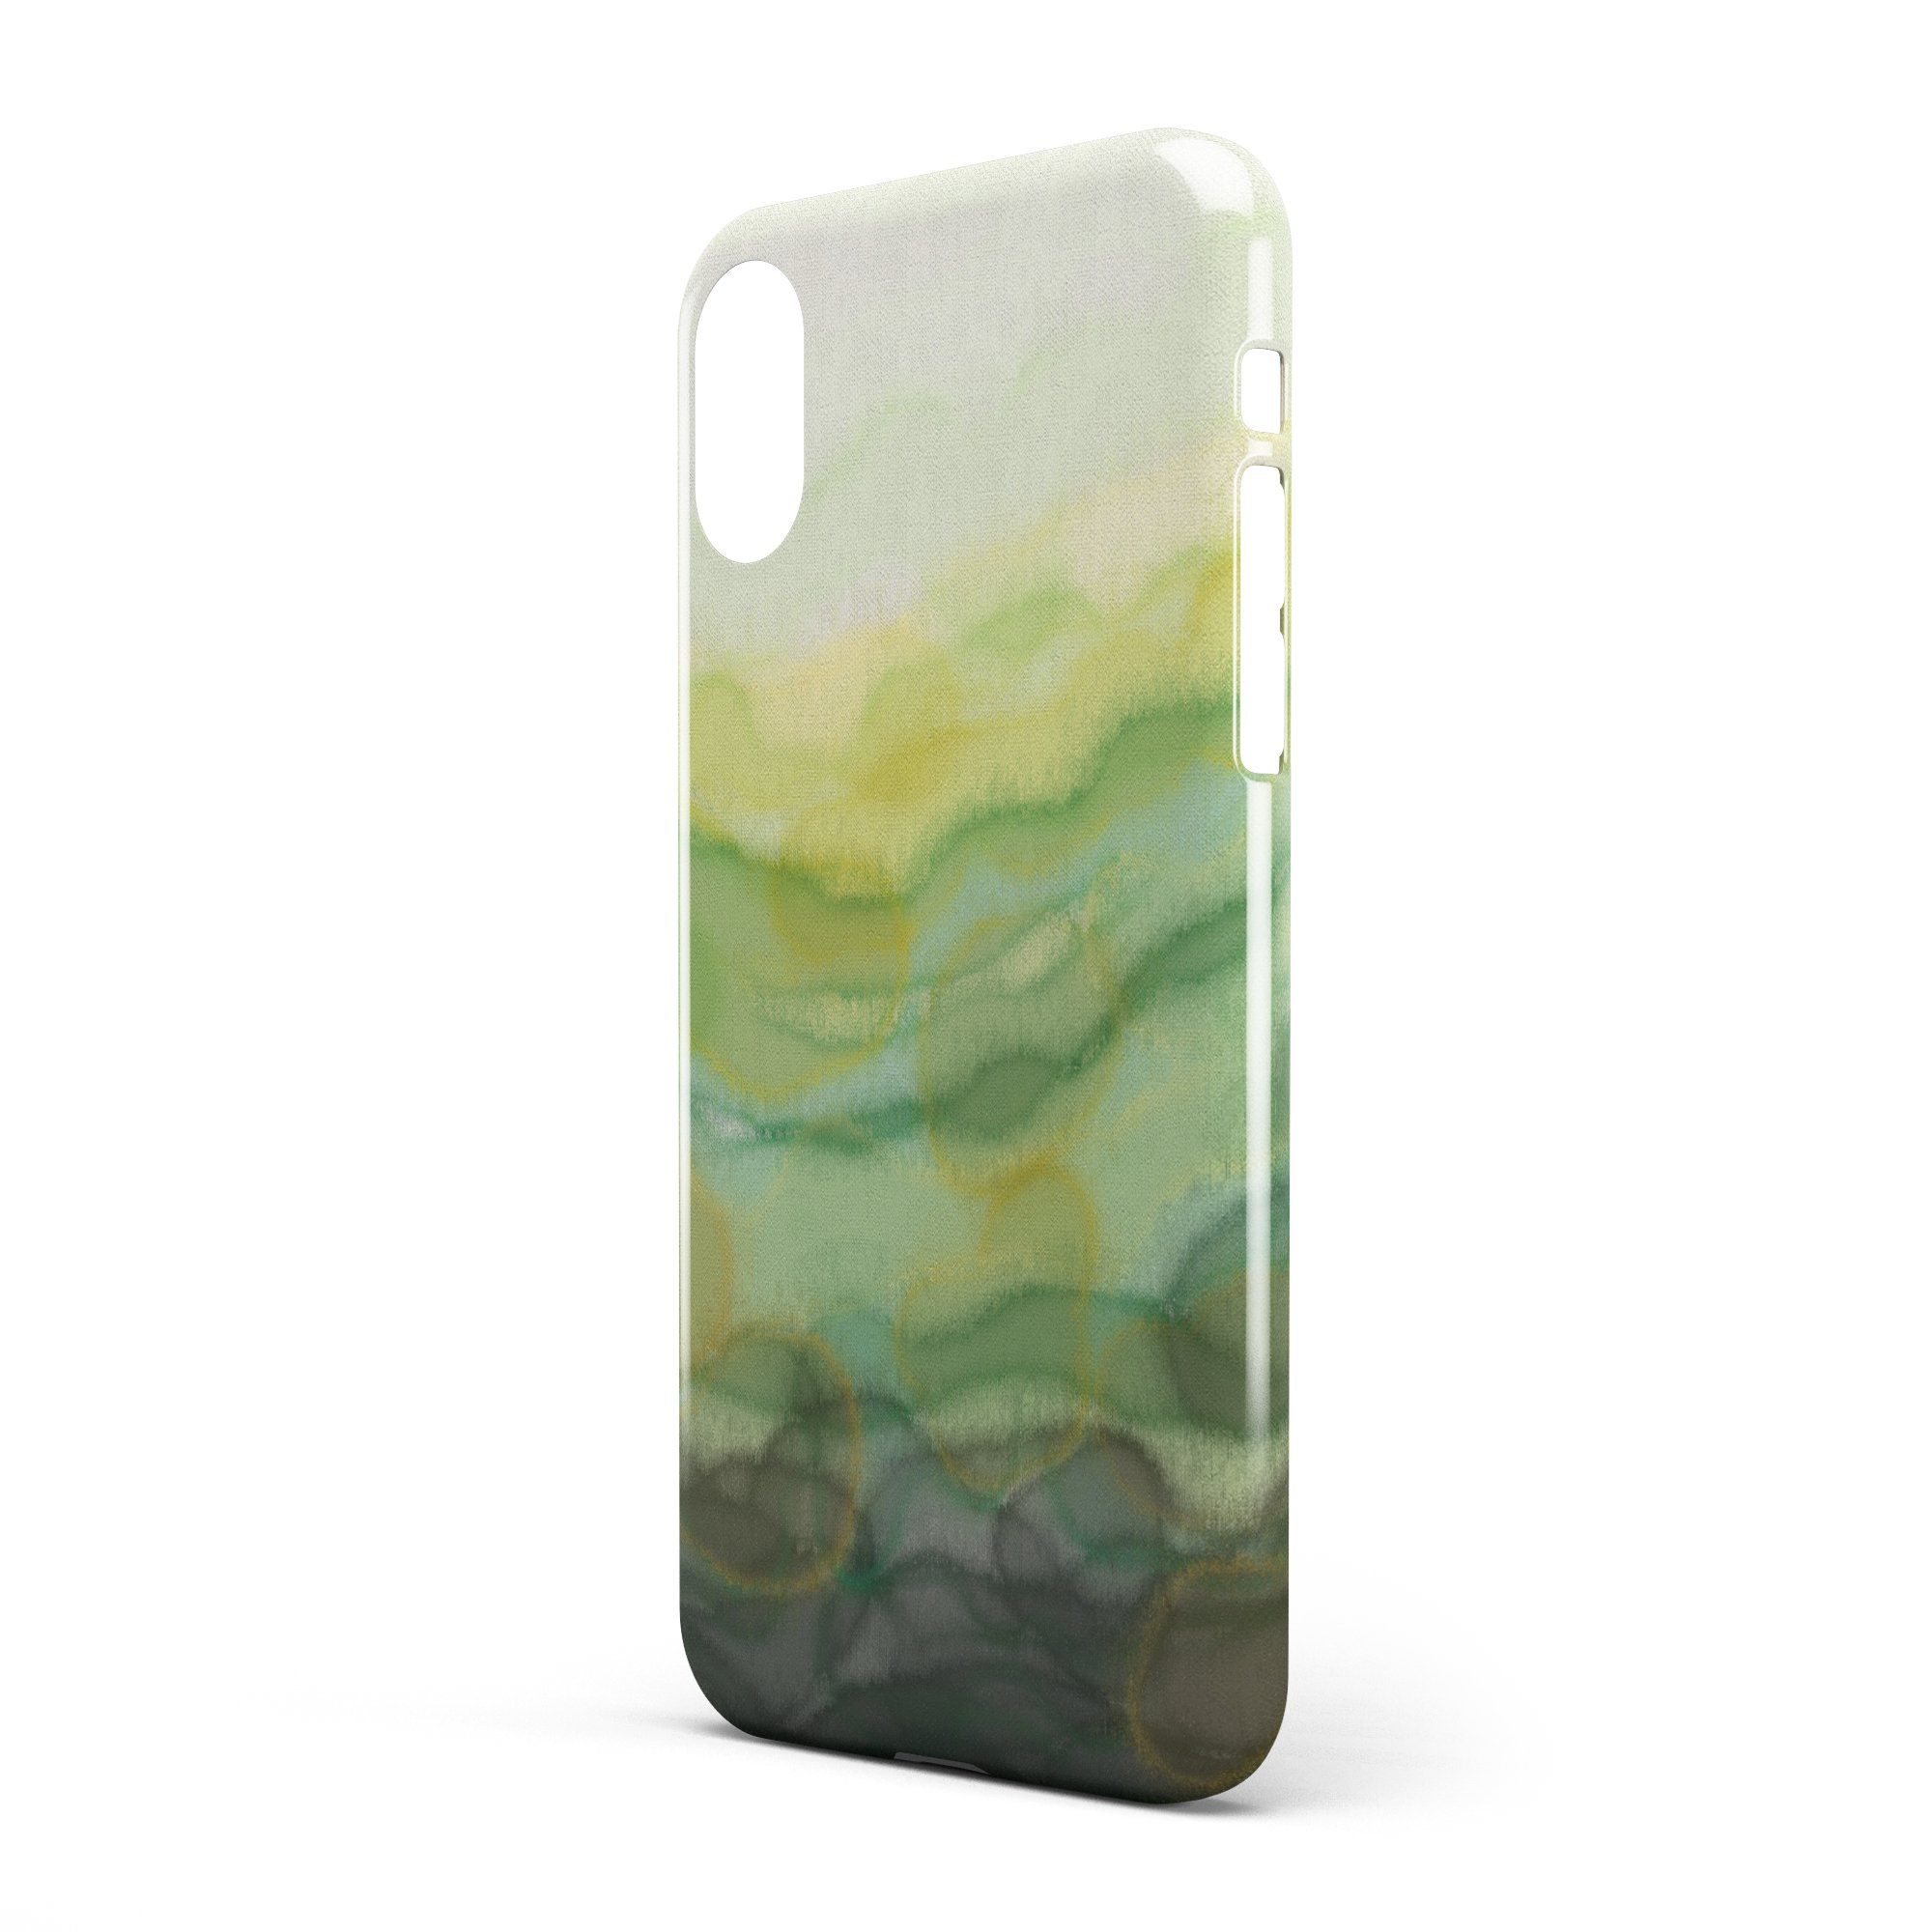 Serenity Green iPhone Case